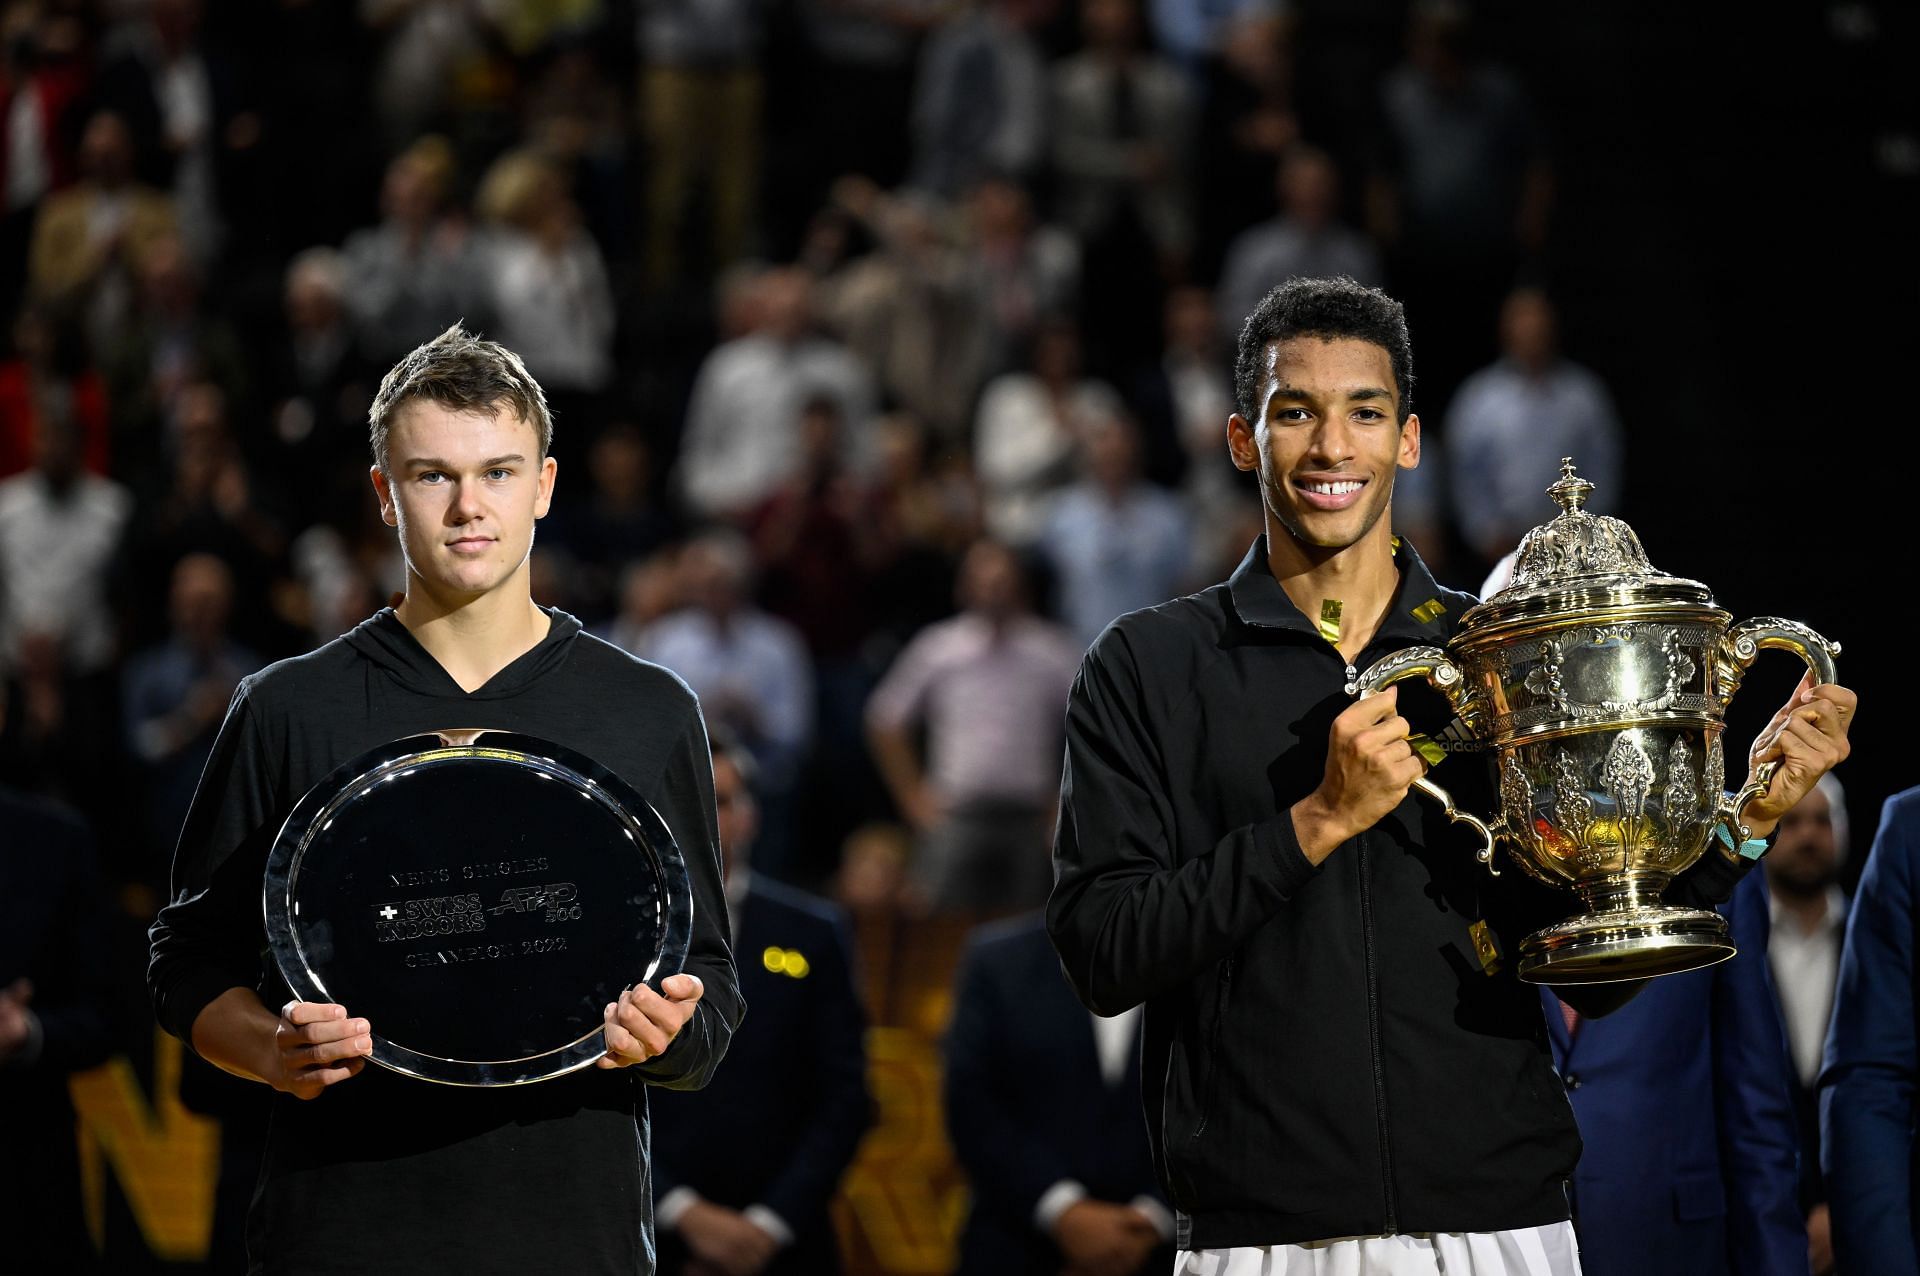 Holger Rune (L) and Felix Auger-Aliassime at the 2022 Swiss Indoors.